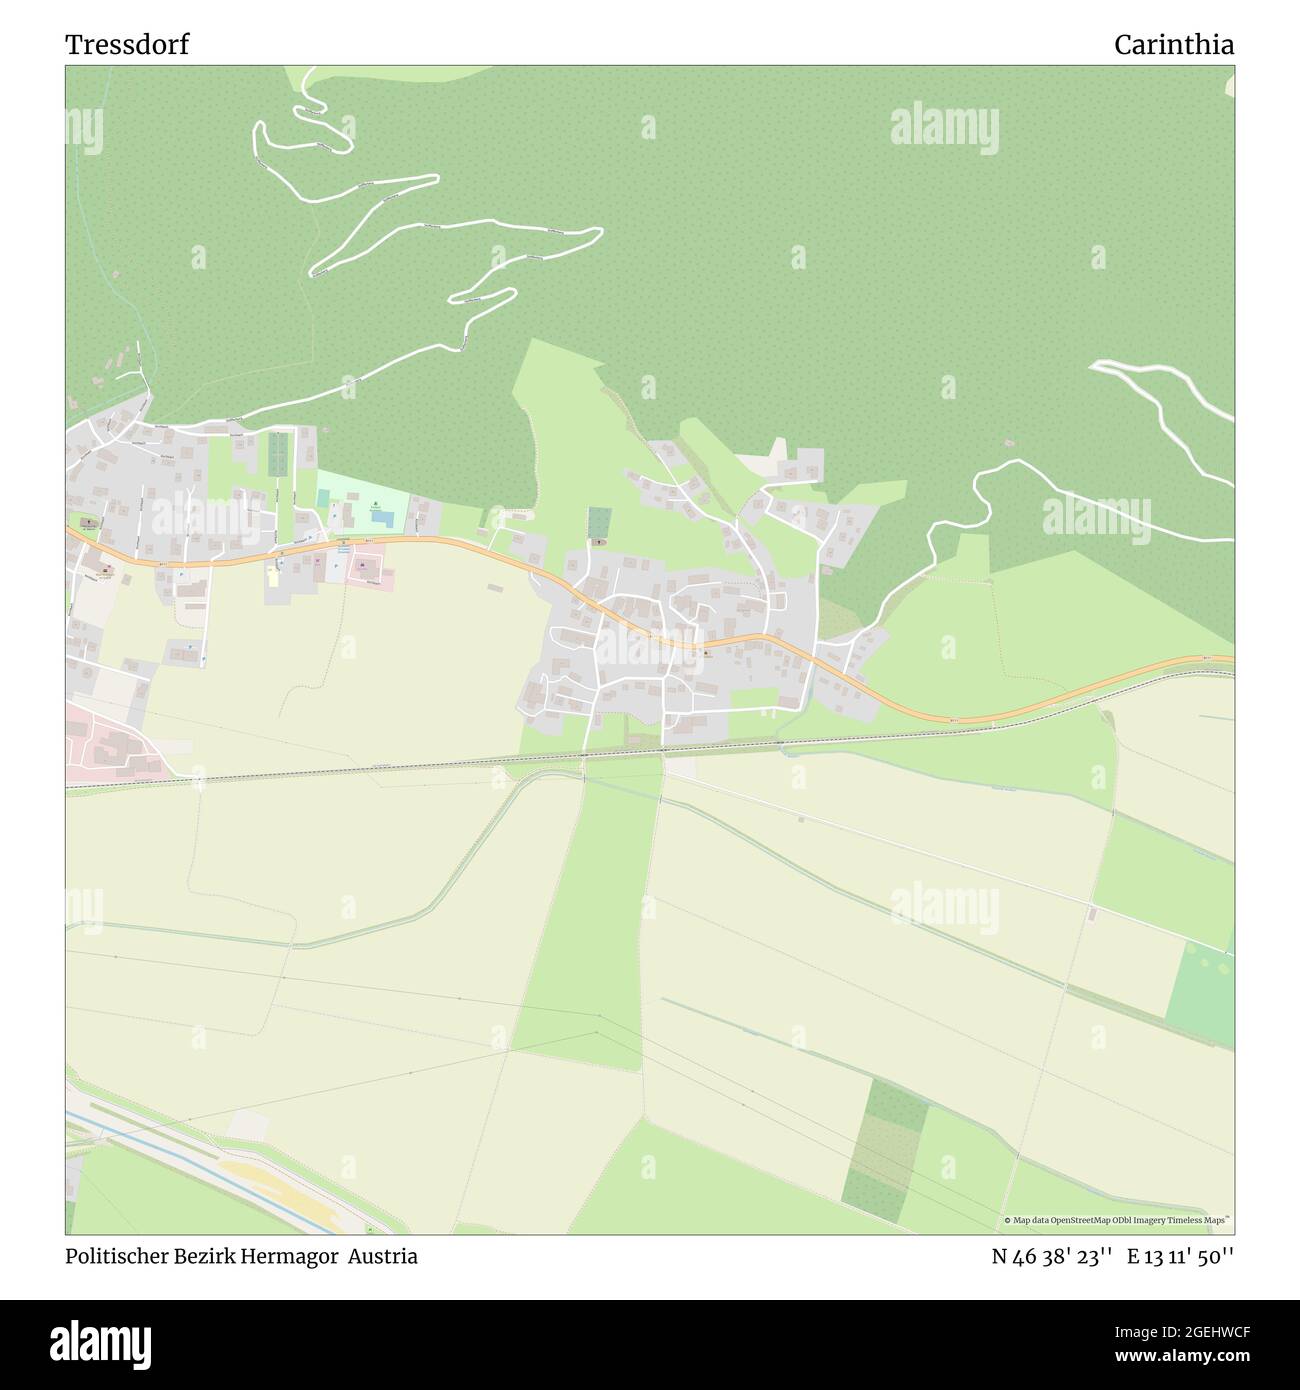 Tressdorf, Politischer Bezirk Hermagor, Austria, Carinthia, N 46 38' 23'', E 13 11' 50'', map, Timeless Map published in 2021. Travelers, explorers and adventurers like Florence Nightingale, David Livingstone, Ernest Shackleton, Lewis and Clark and Sherlock Holmes relied on maps to plan travels to the world's most remote corners, Timeless Maps is mapping most locations on the globe, showing the achievement of great dreams Stock Photo